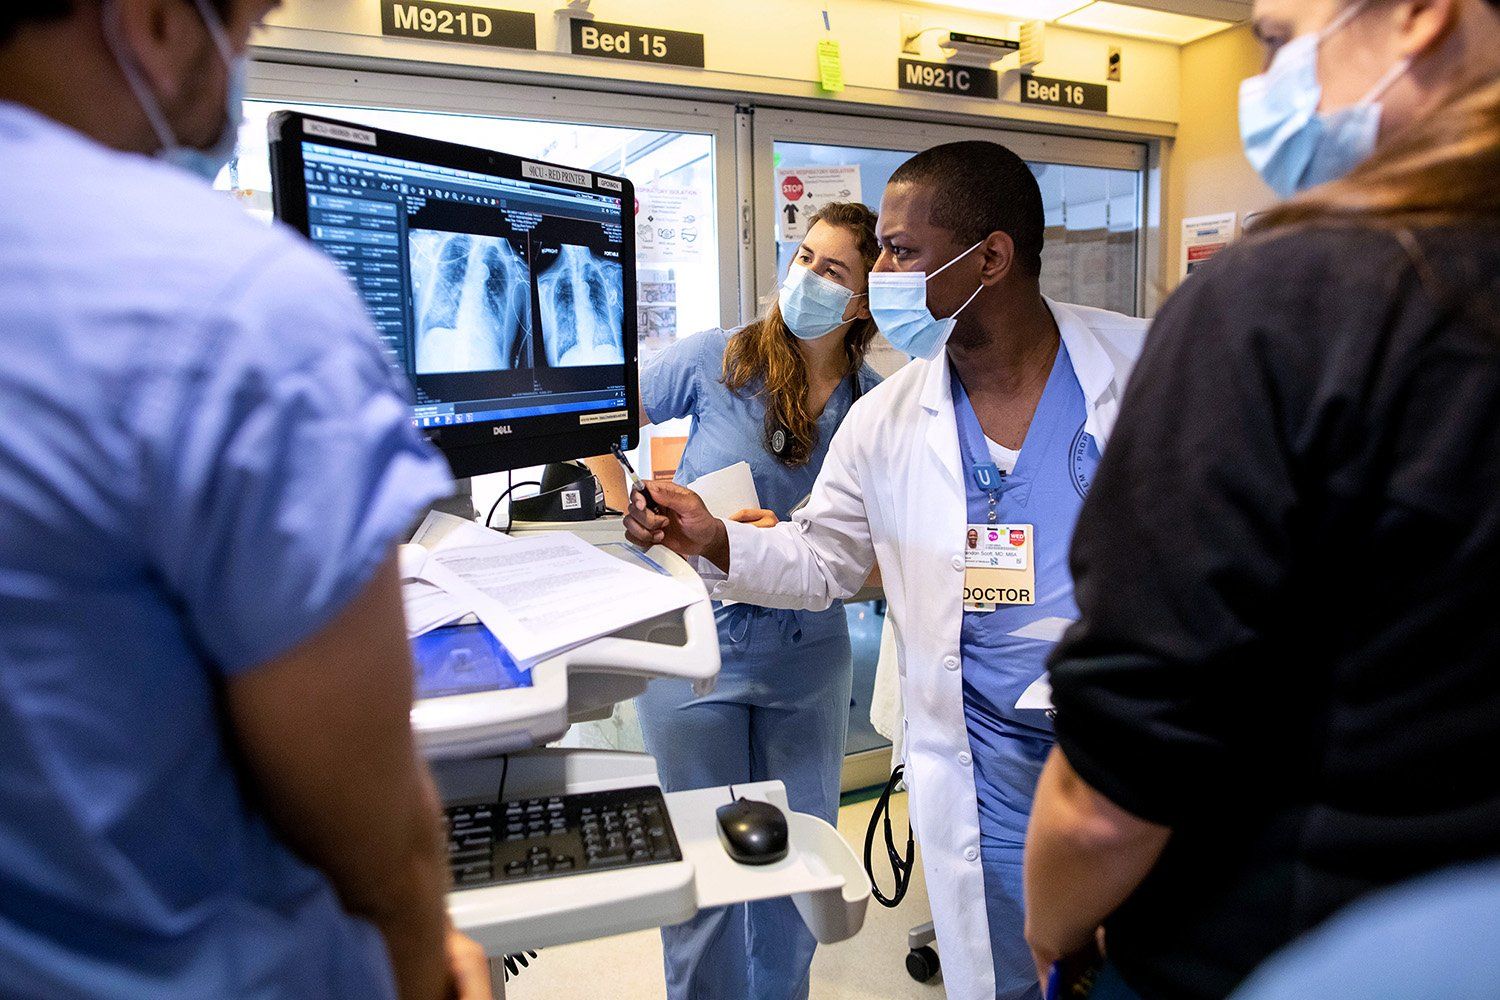 Nurses and doctors examine a scan of a patient's lungs on a monitor